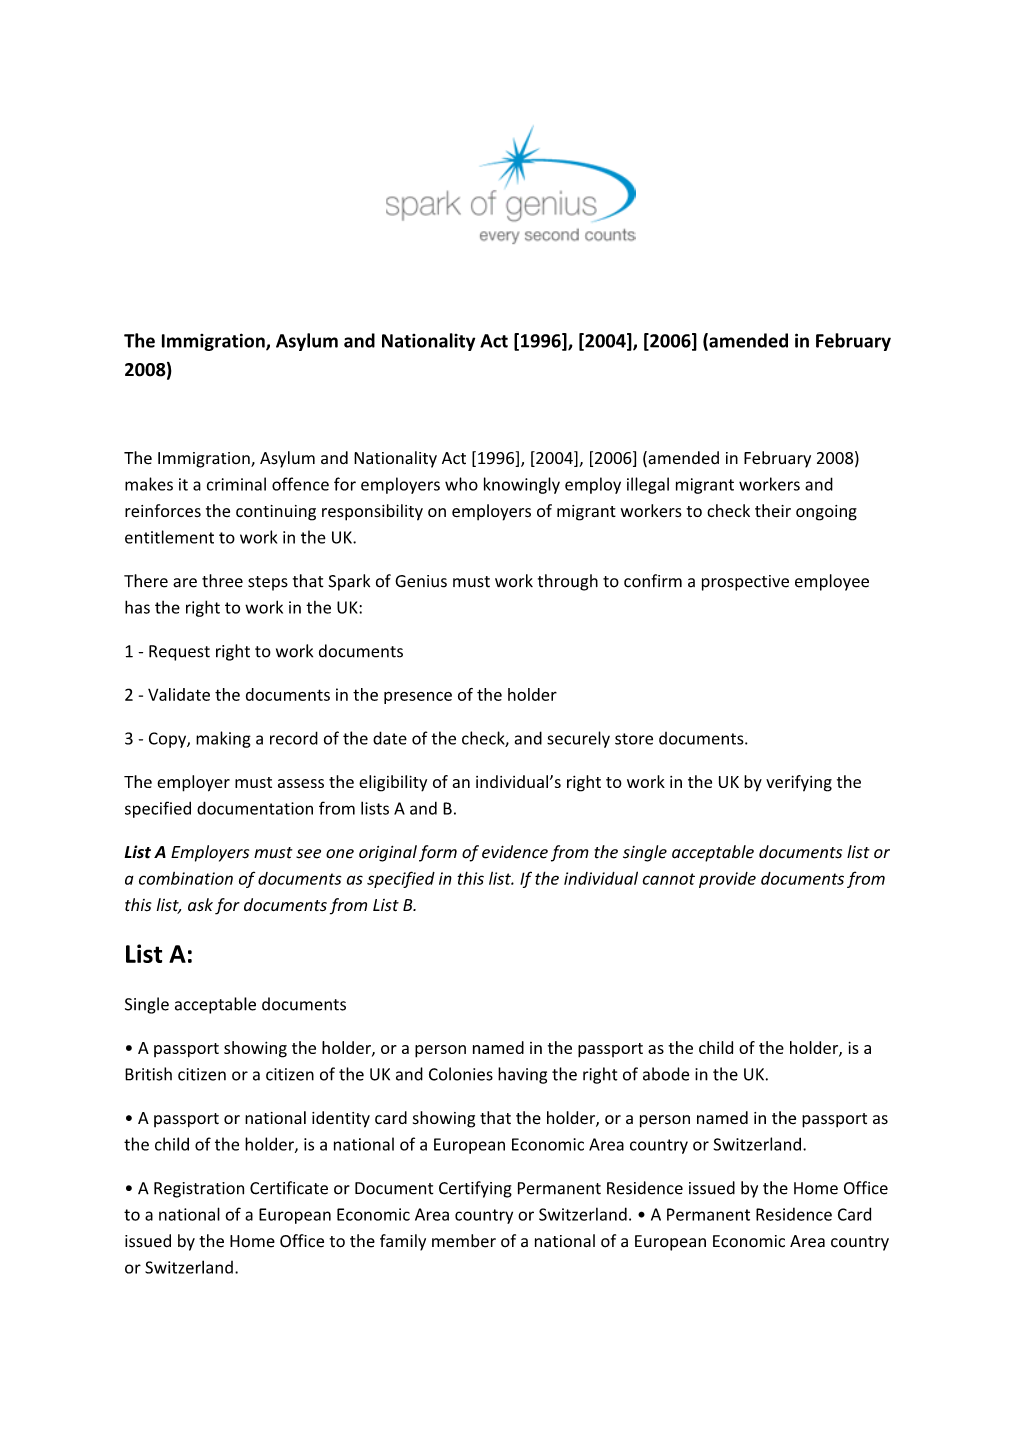 The Immigration, Asylum and Nationality Act 1996 , 2004 , 2006 (Amended in February 2008)